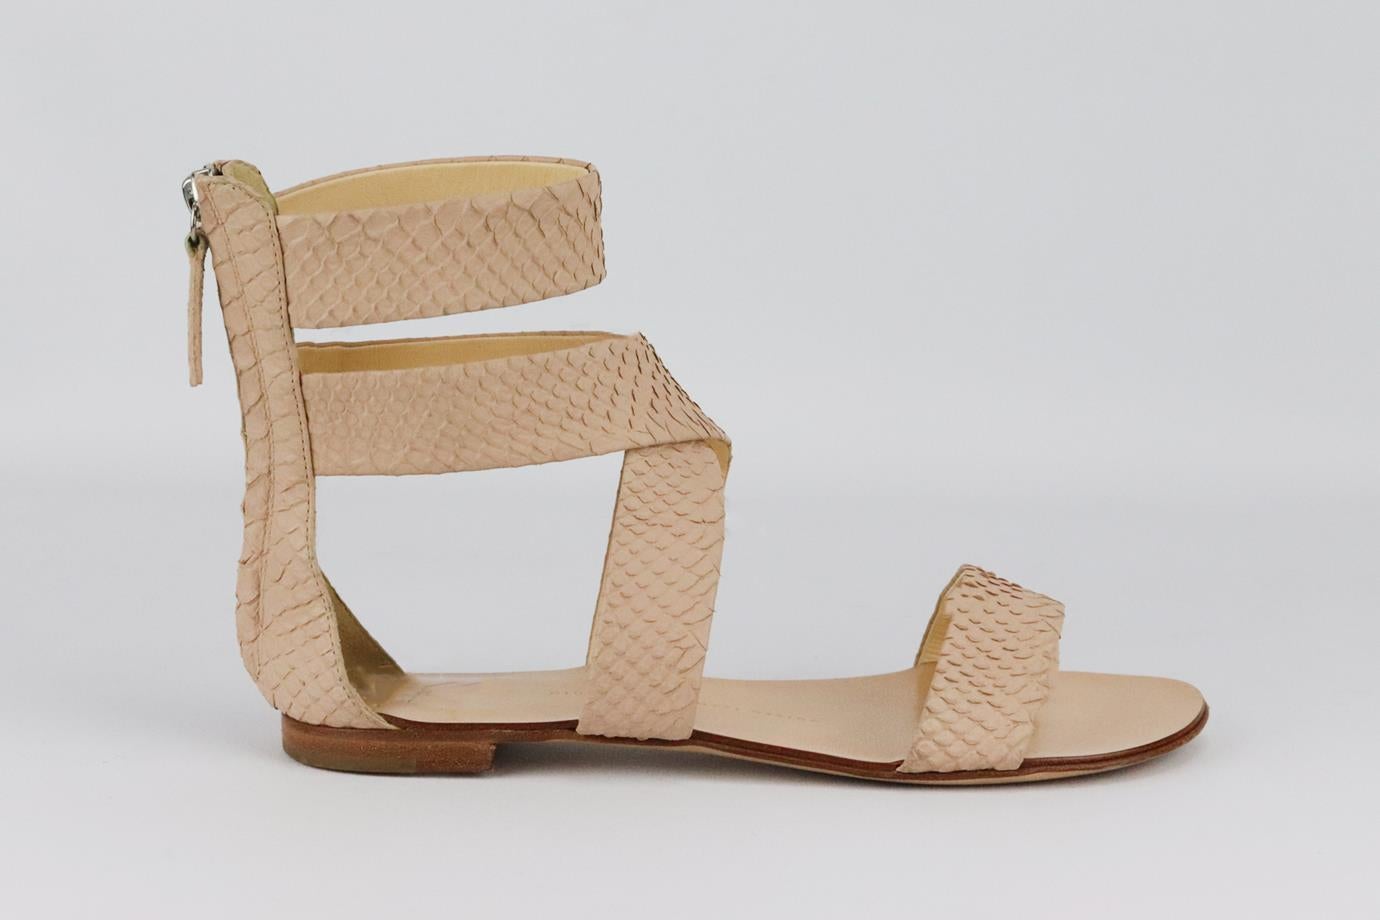 Giuseppe Zanotti snake effect leather sandals. Nude. Zip fastening at back. Does not come with box or dustbag. Size: EU 37 (UK 4, US 7). Insole: 9.3 in. Heel: 0.5 in
